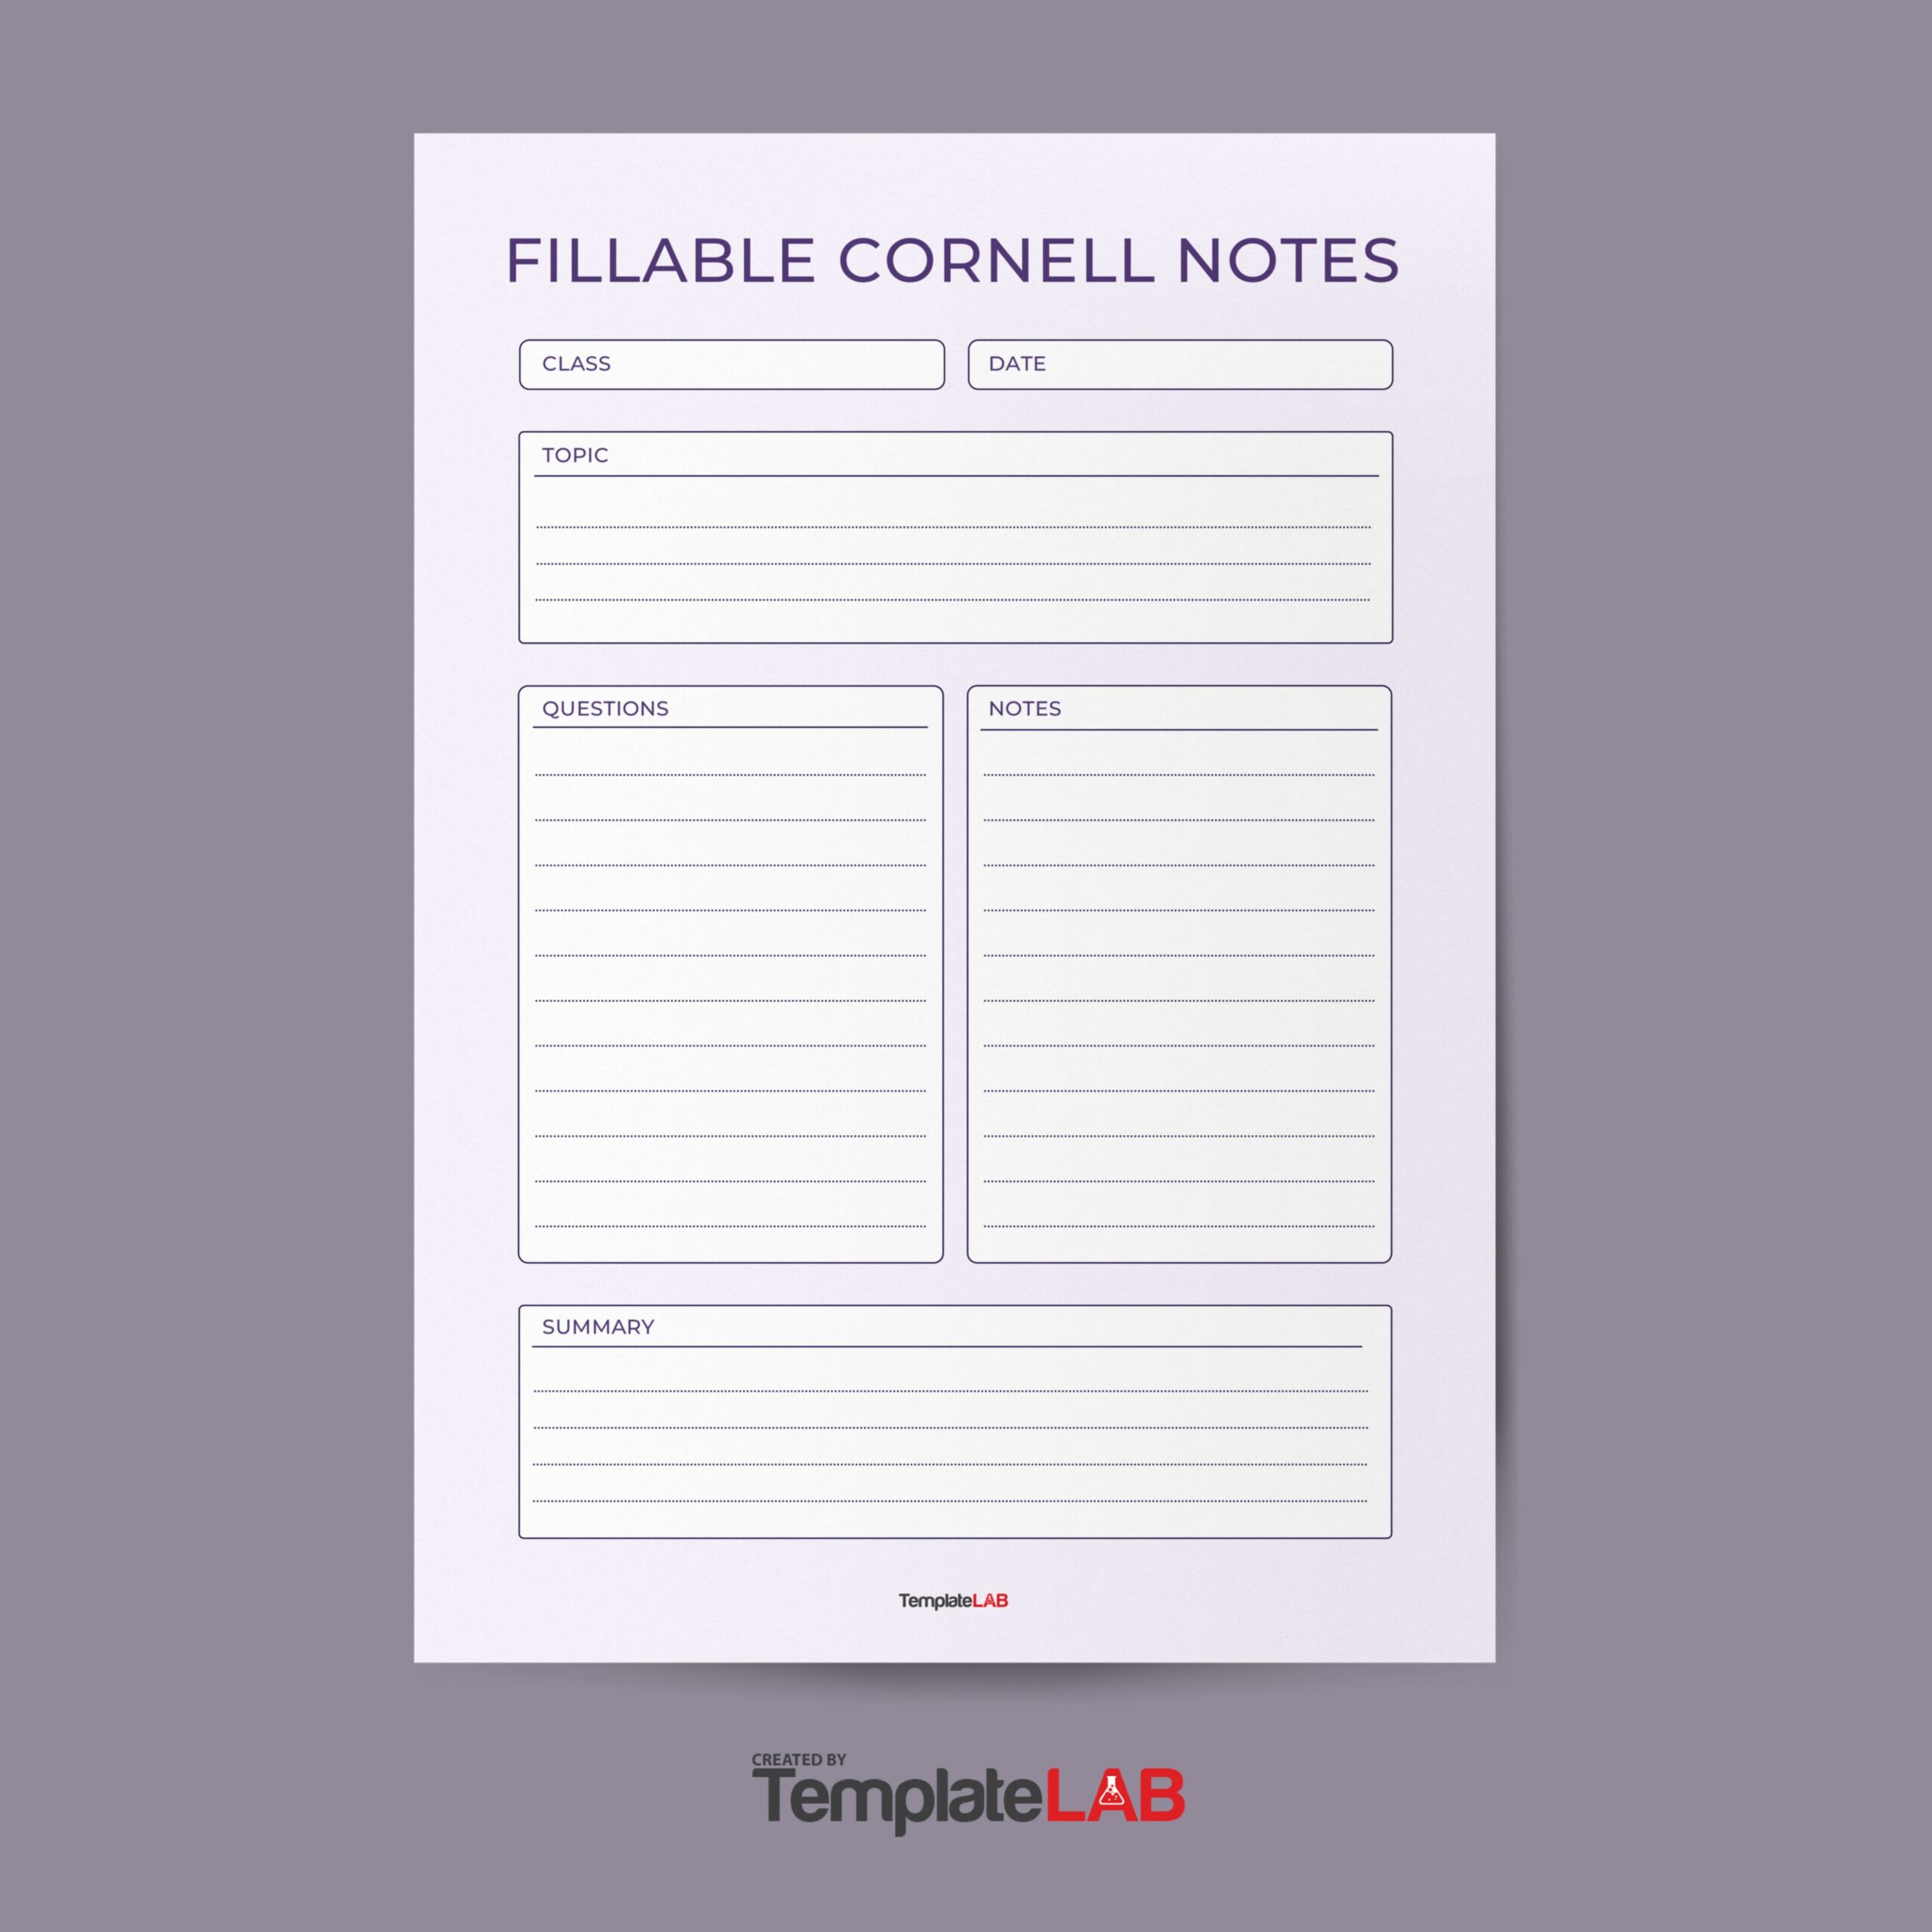 16 Printable Cornell Notes Templates [Word, Excel, PDF]